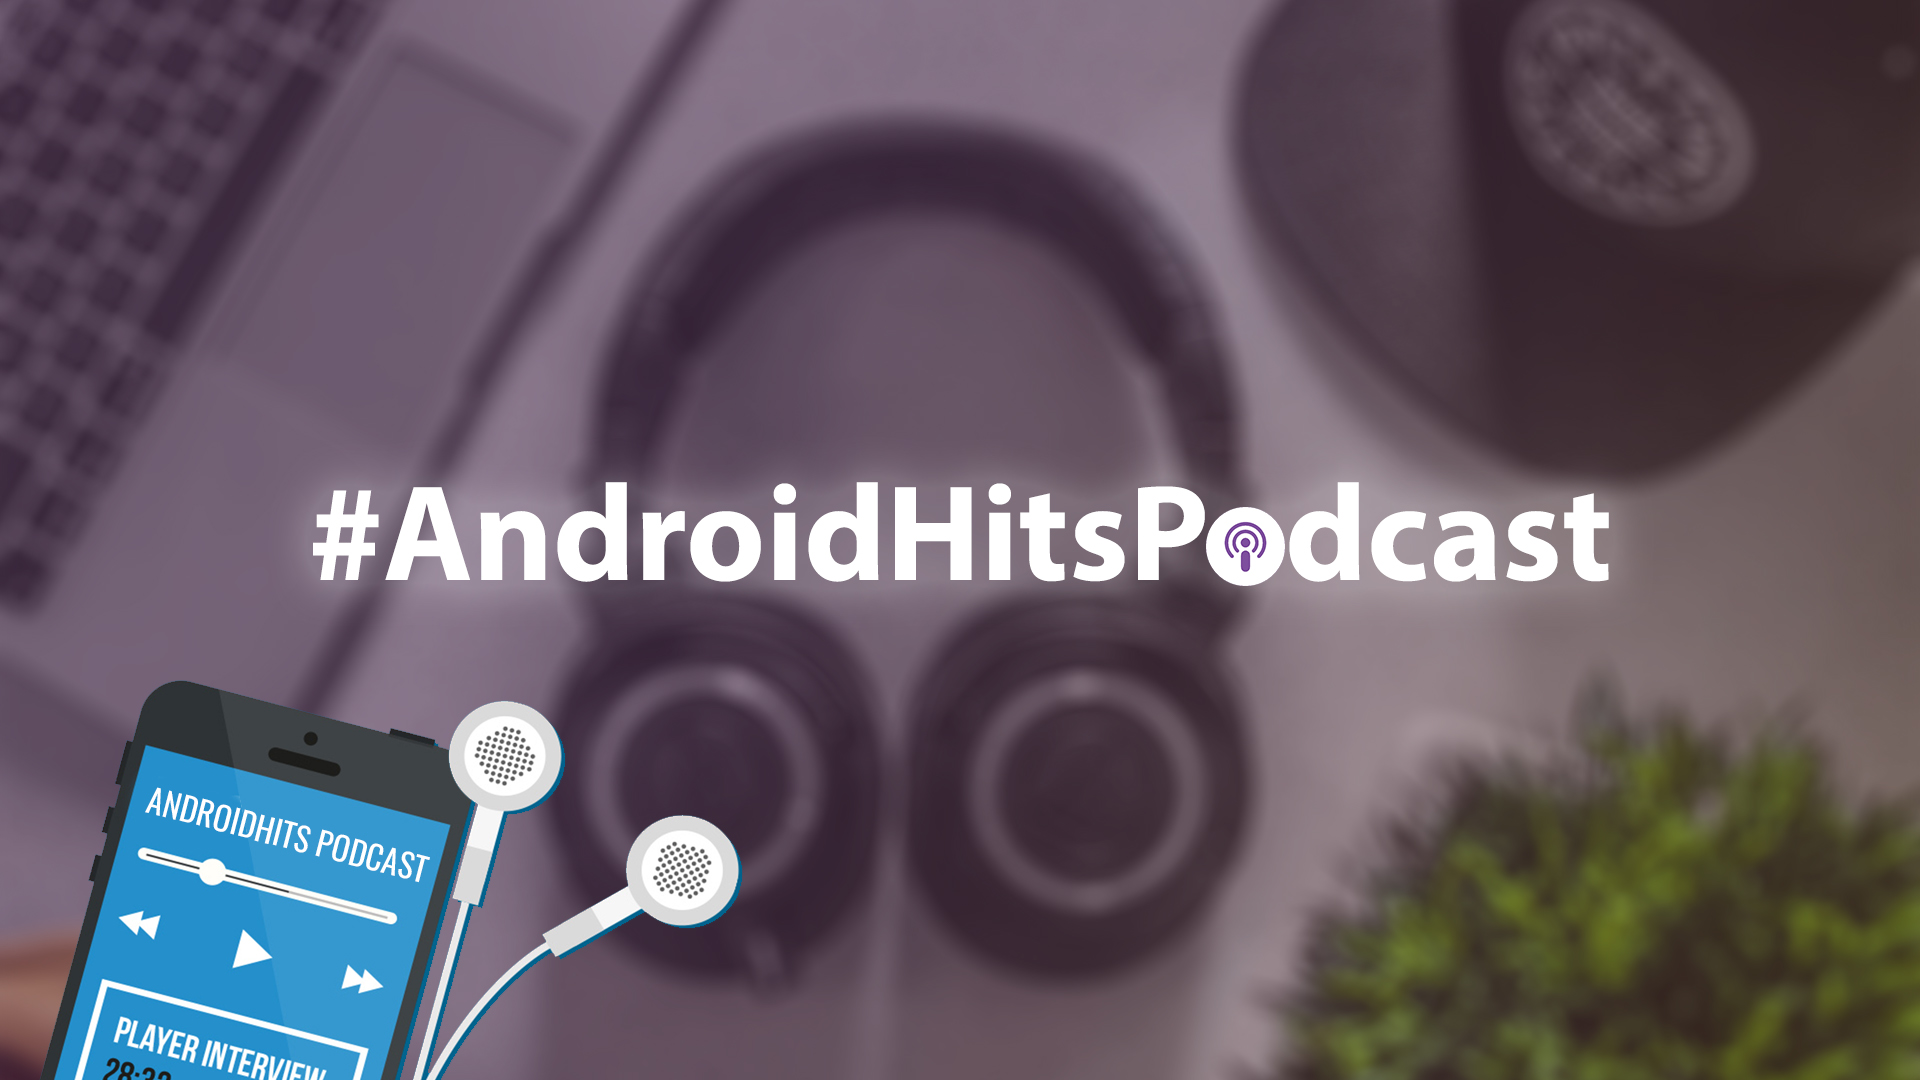 It's Podcast time! Starting AndroidHits Podcast series #AndroidHitsPodcast 1